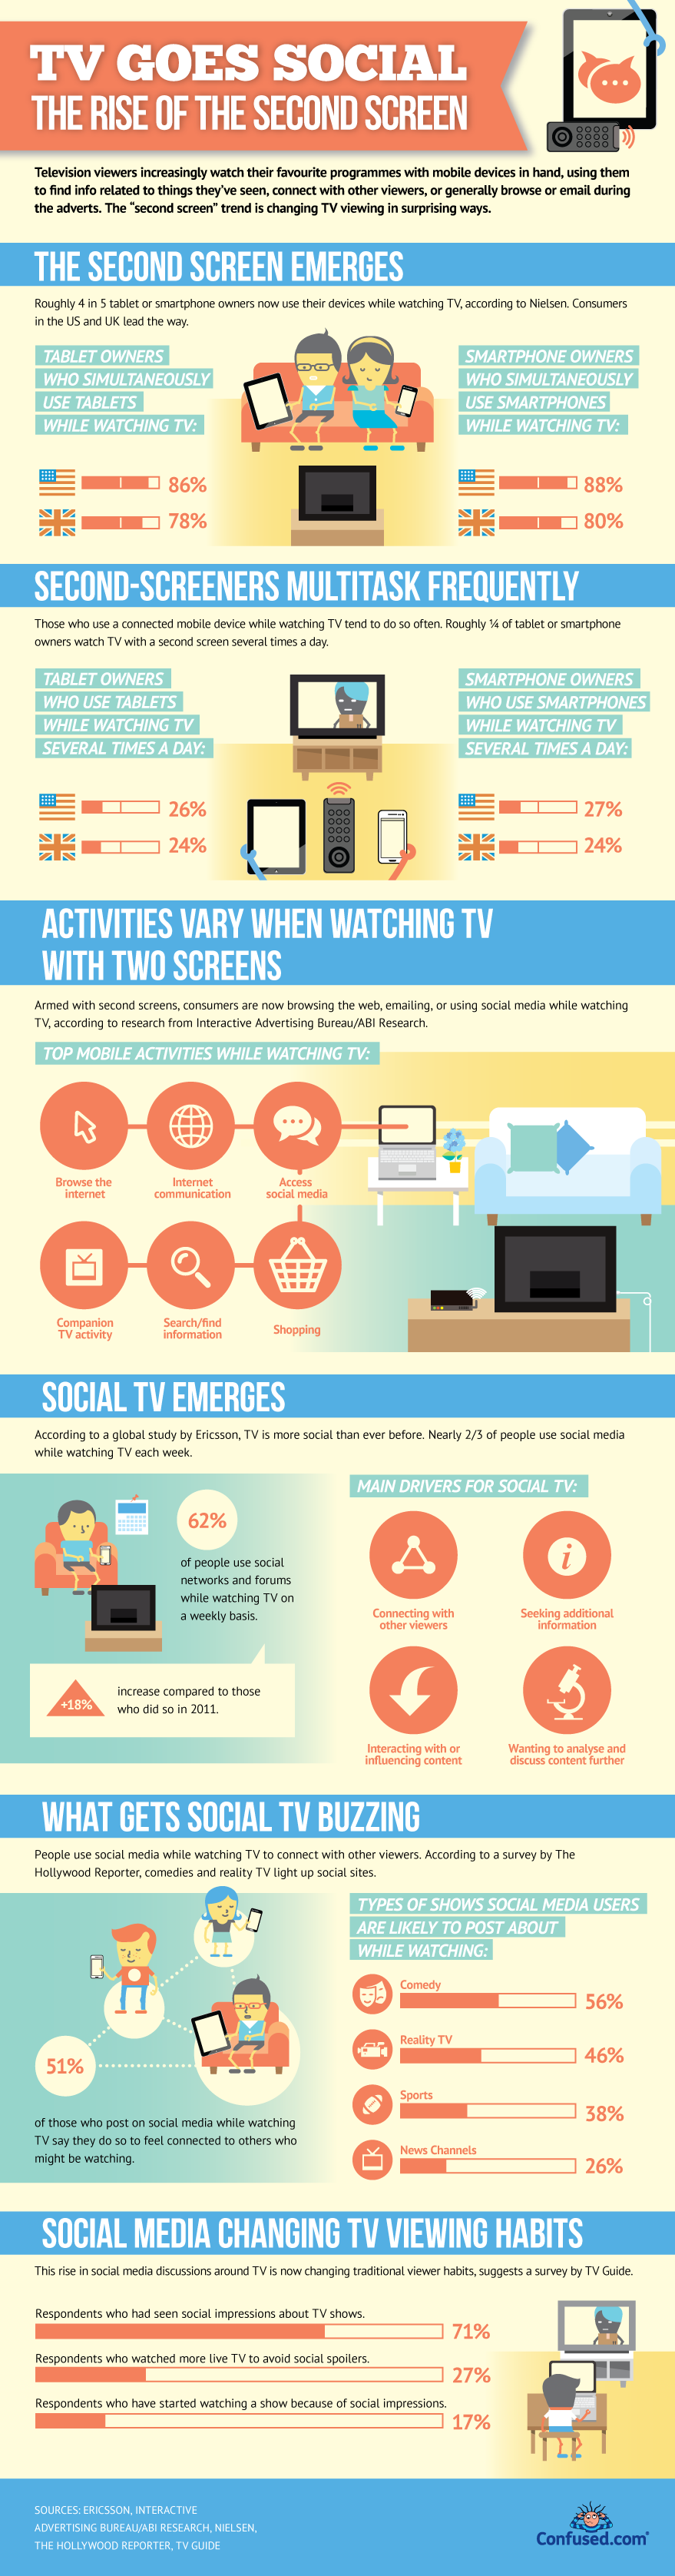 infographic on social TV